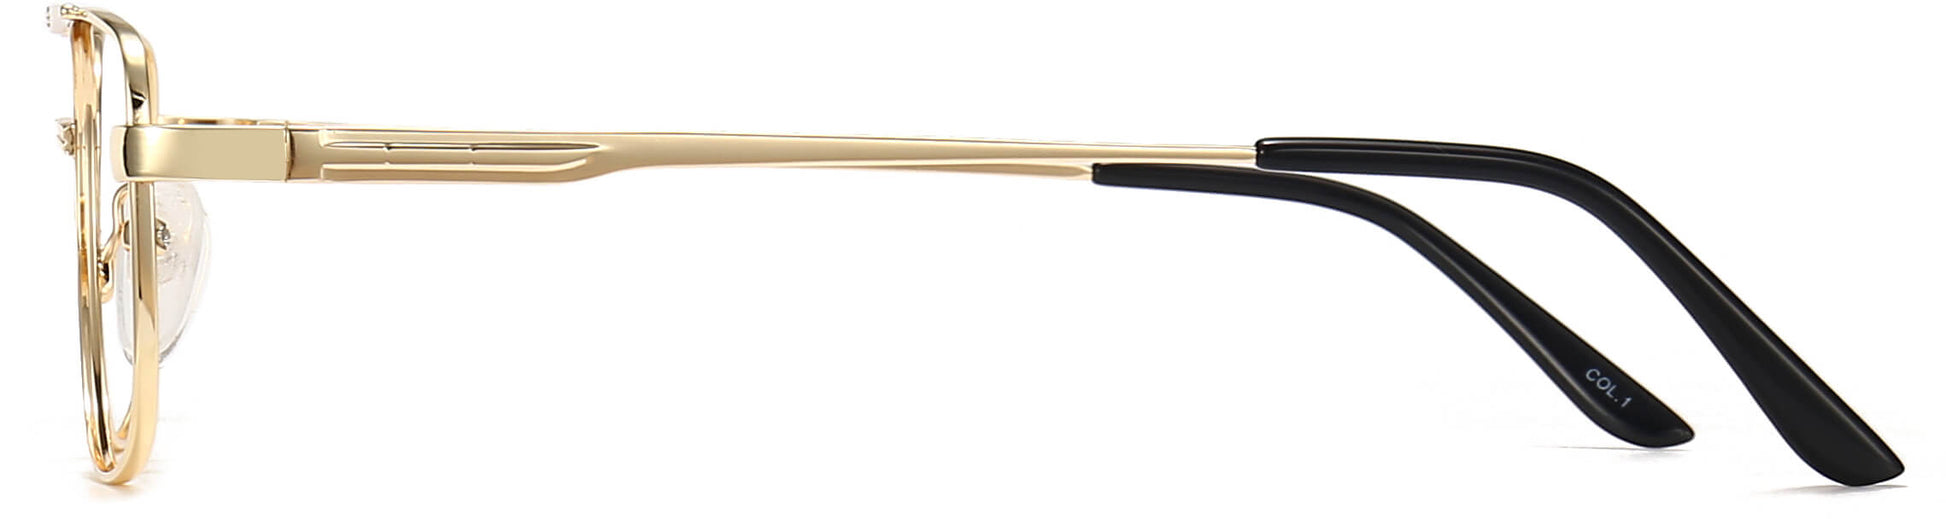 Nelson Square Gold Eyeglasses from ANRRI, side view